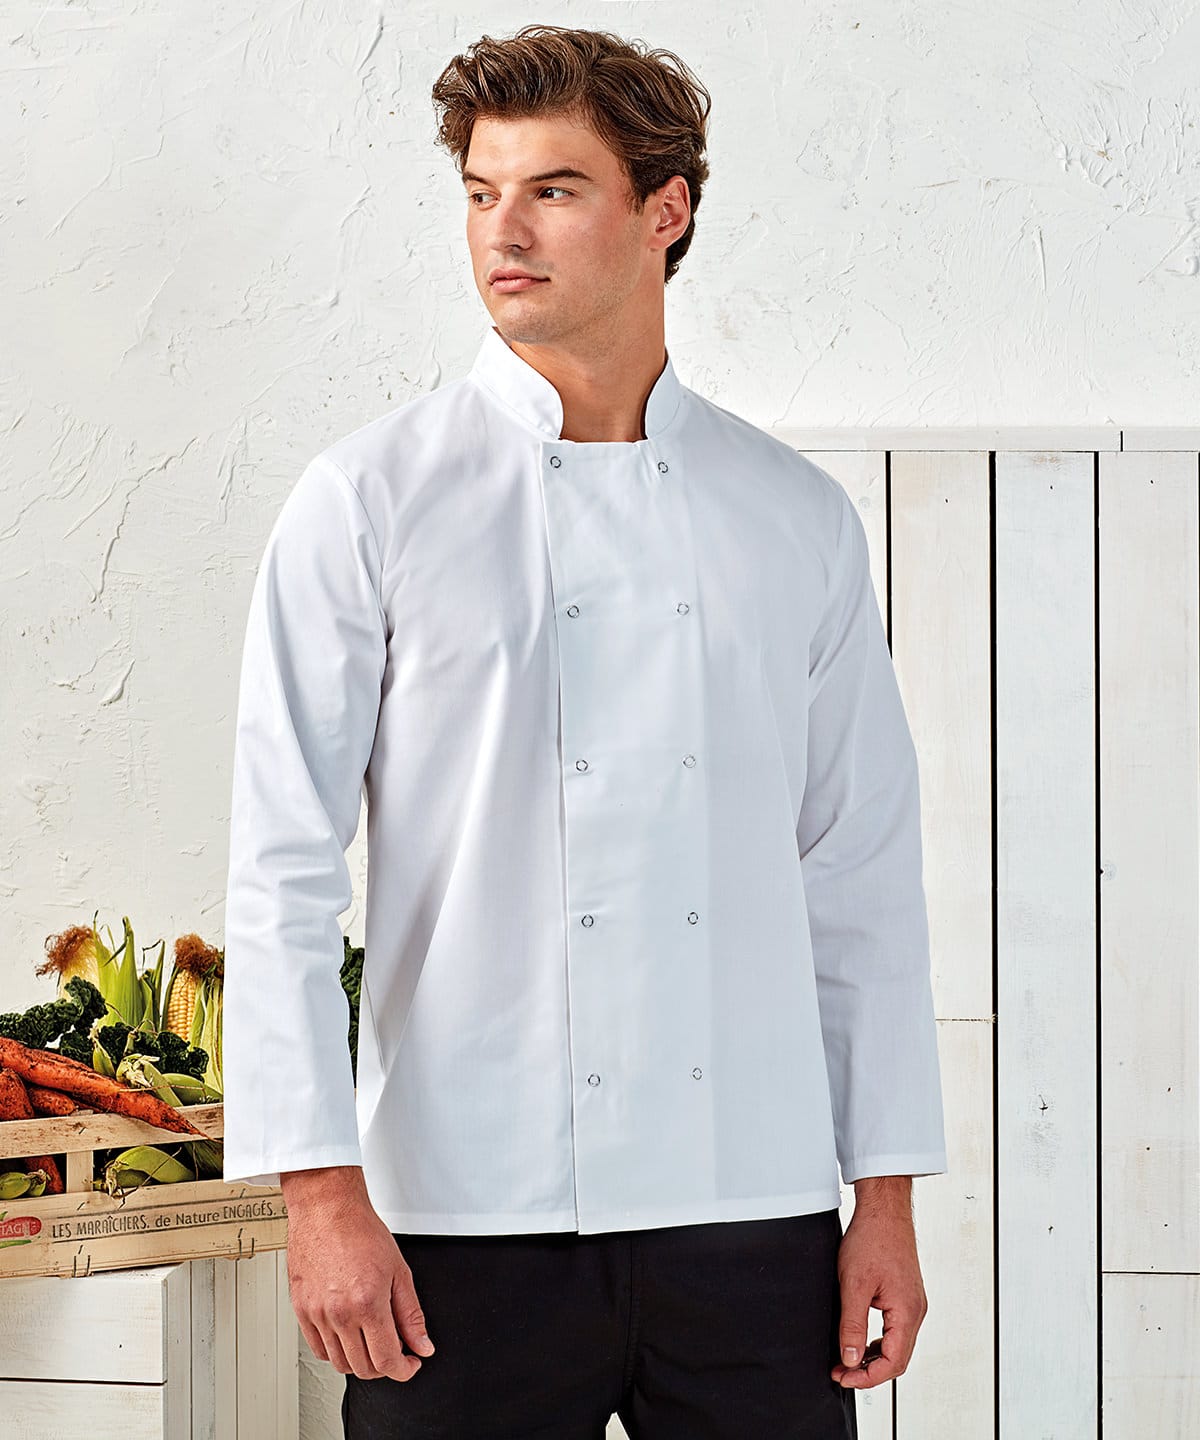 Premier Studded Front Long Sleeve Chef’s Jacket